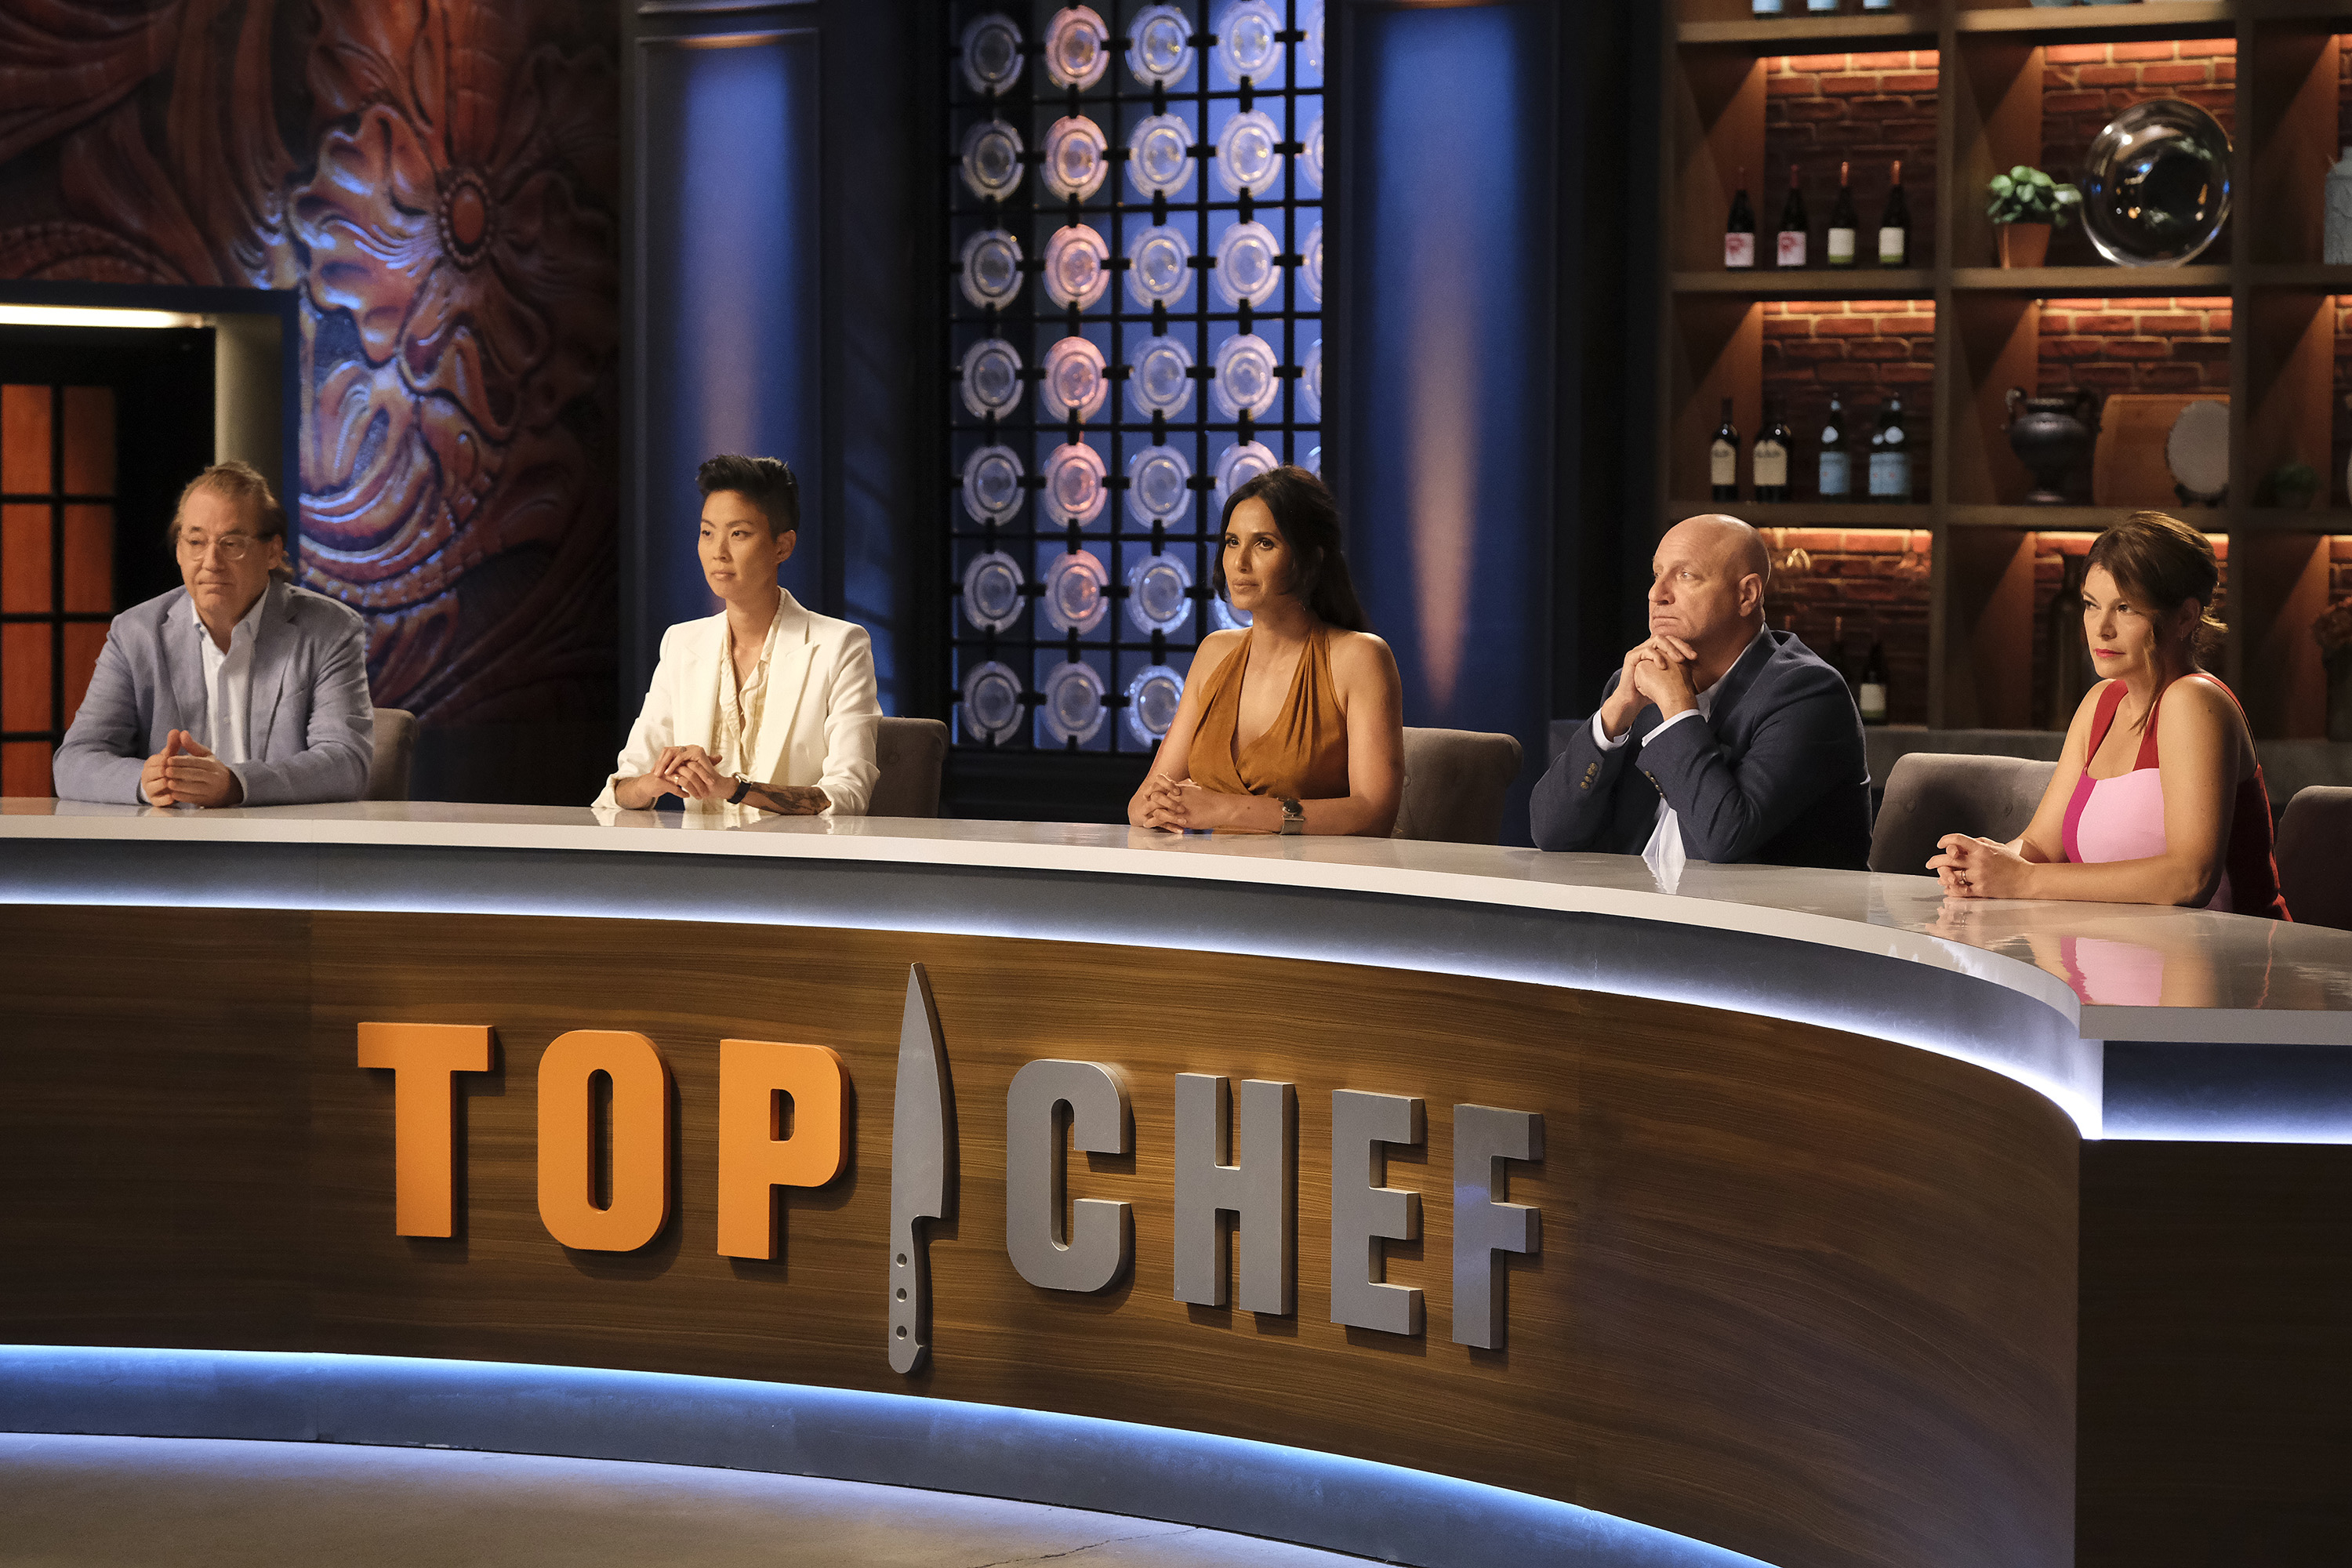 The top chef judges sitting at the panel